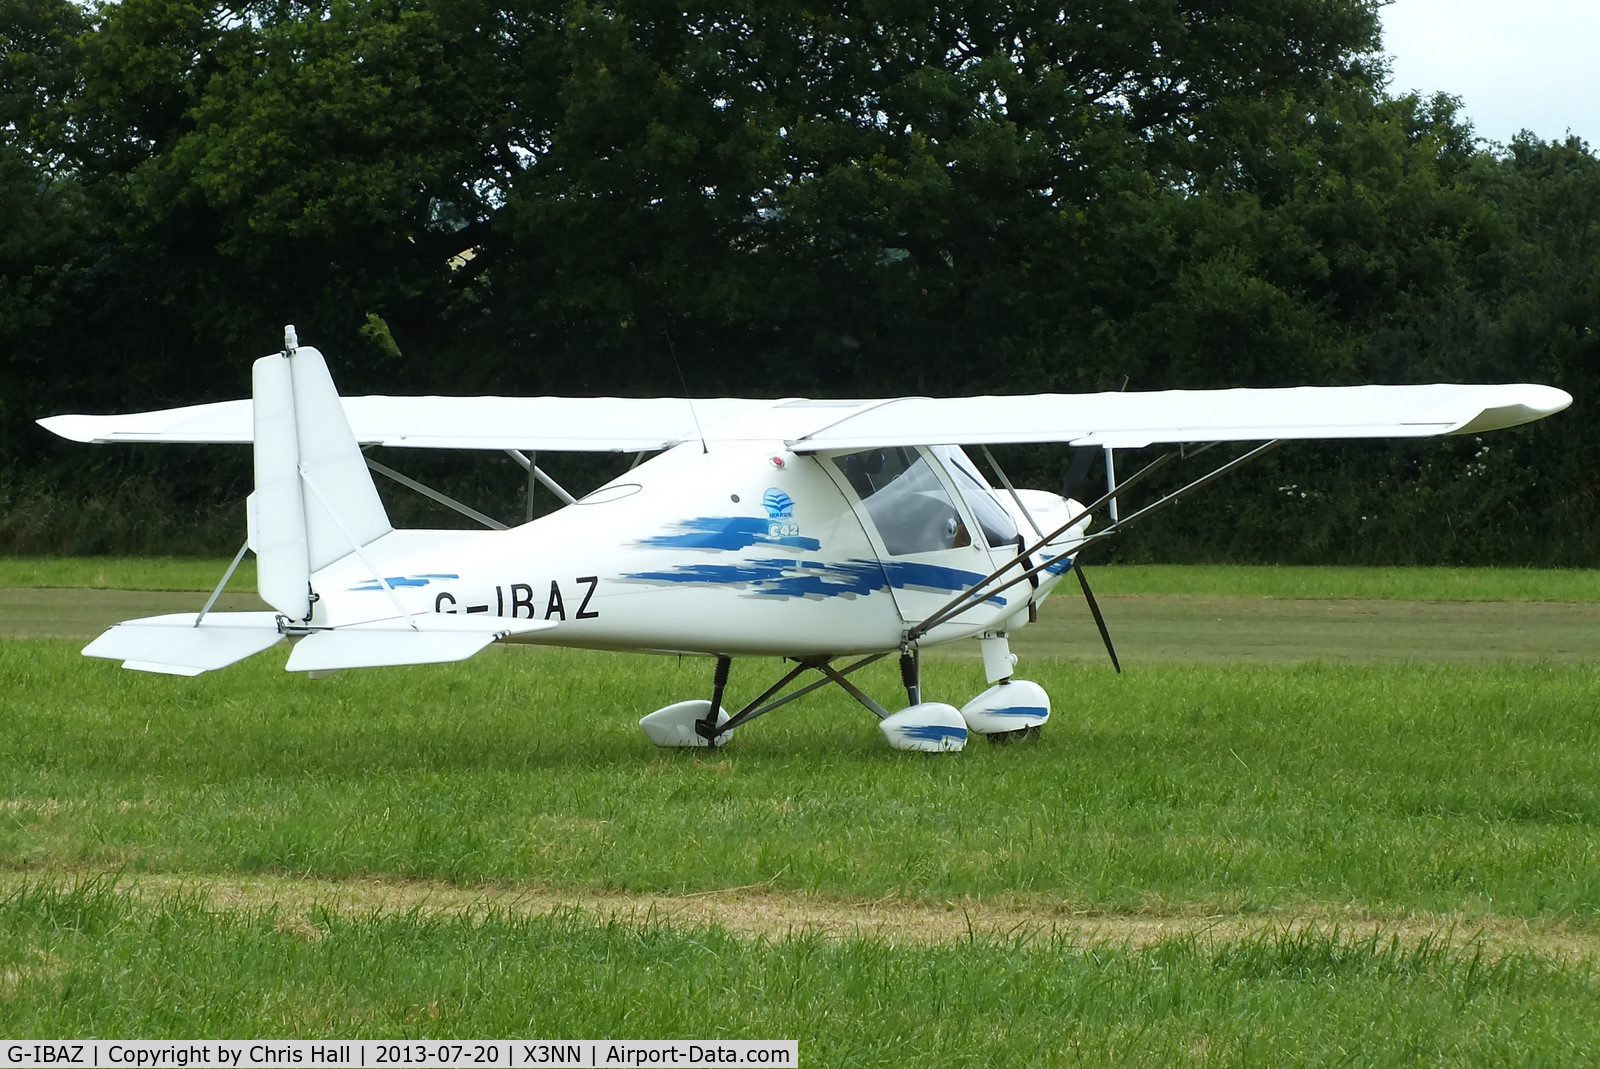 G-IBAZ, 2004 Comco Ikarus C42 FB100 C/N 0409-6622, at the Stoke Golding stakeout 2013